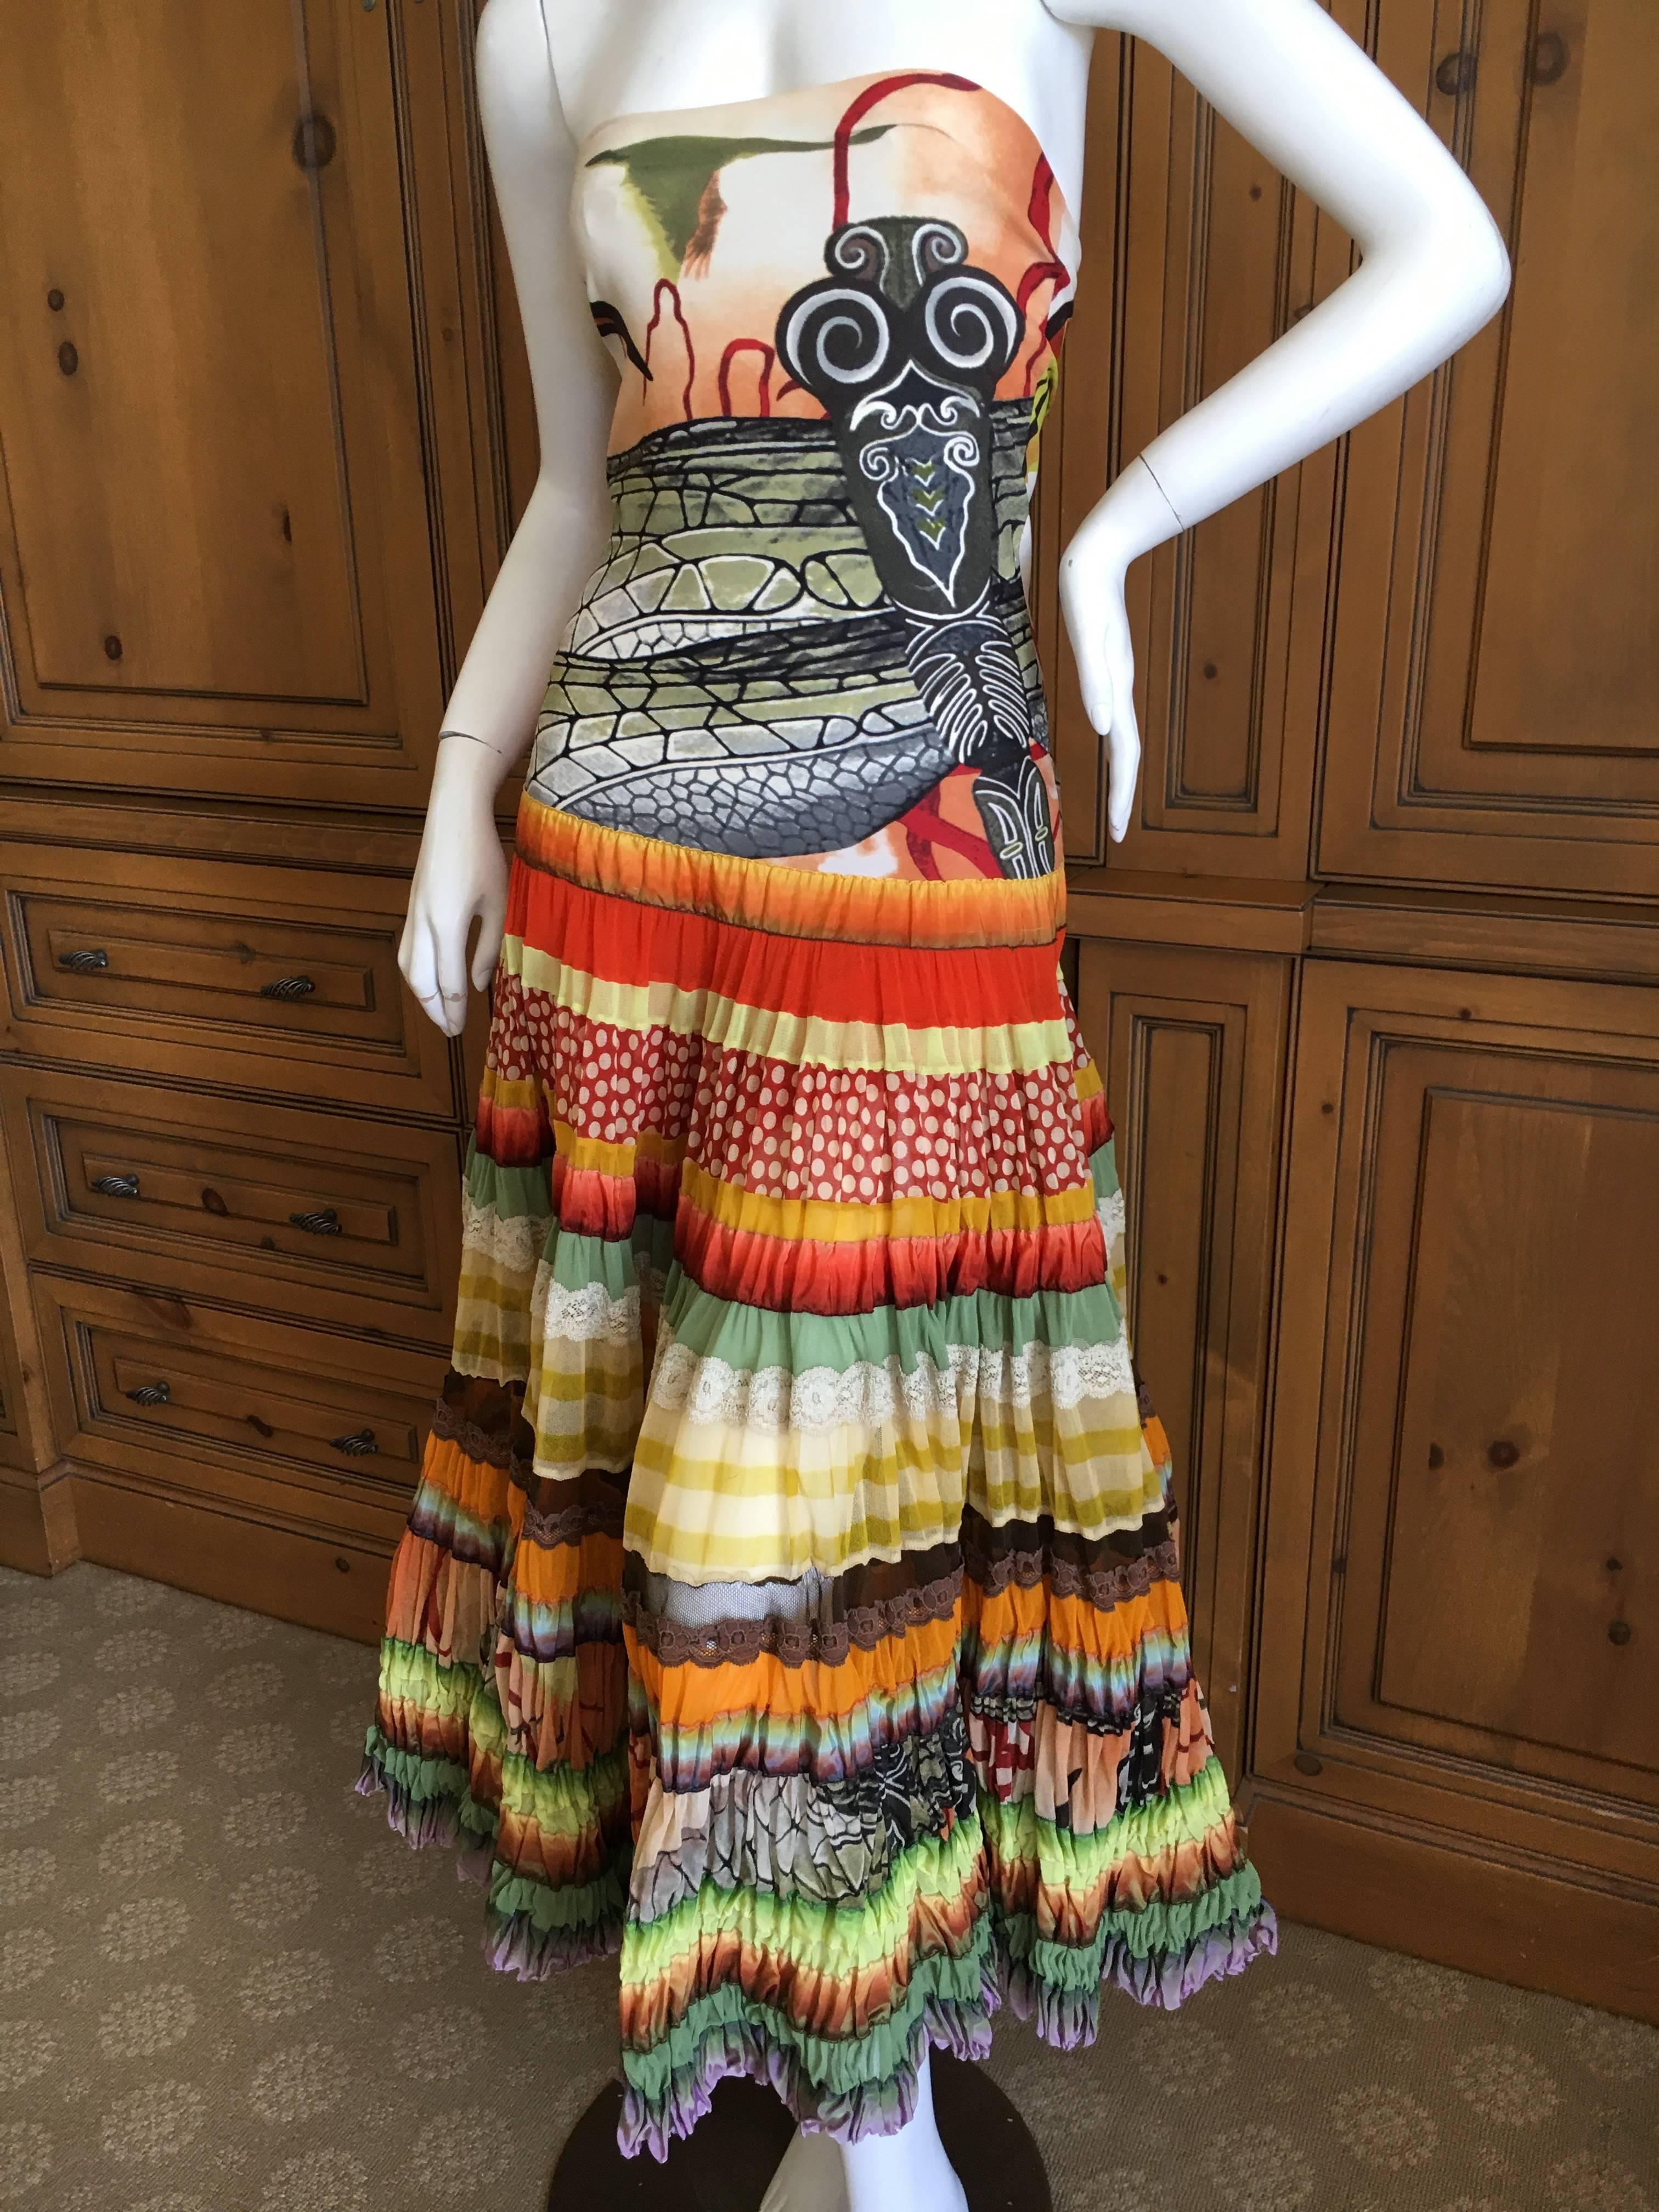 Jean Paul Gaultier Maile Dragonfly Pattern Strapless Dress with Gypsy Skirt.
Wonderful technicolor ruffled layered gypsy skirt, this is New with Tags, never worn.
Size M
Bust 38'
Waist 26"
Hips 45"
Length 44"
Excellent unworn condition